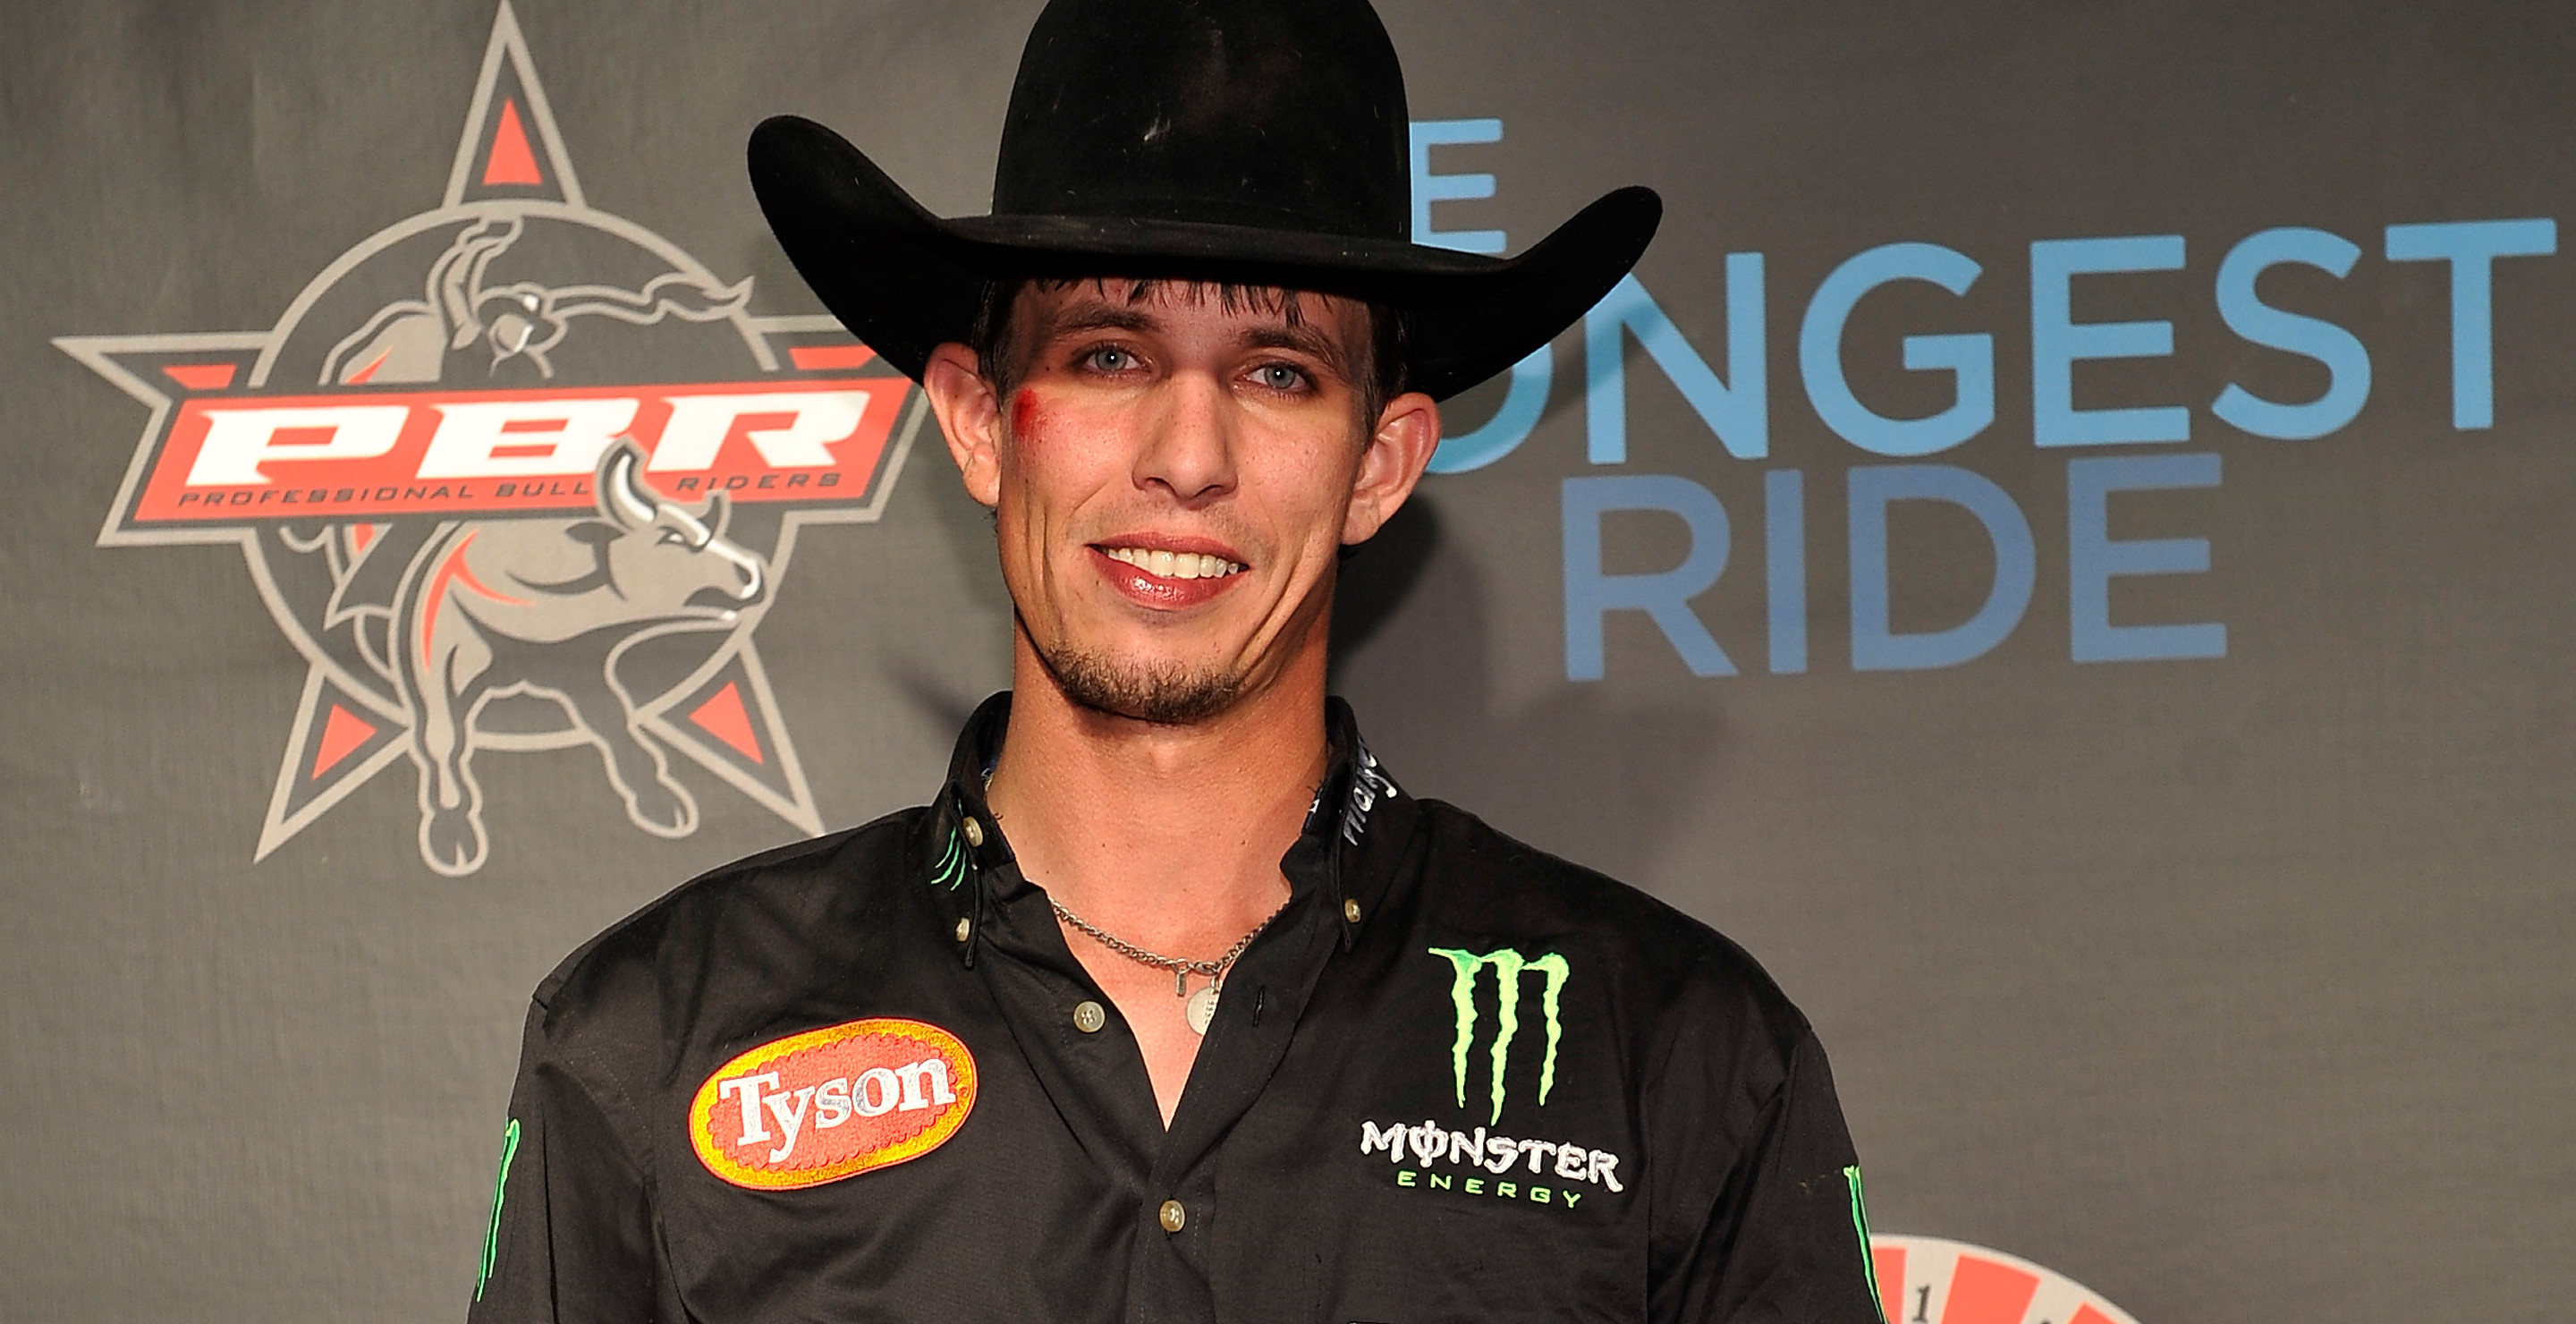 Bull Riding Icon J.B. Mauney Reveals He Bought The Bull That Ended His Career